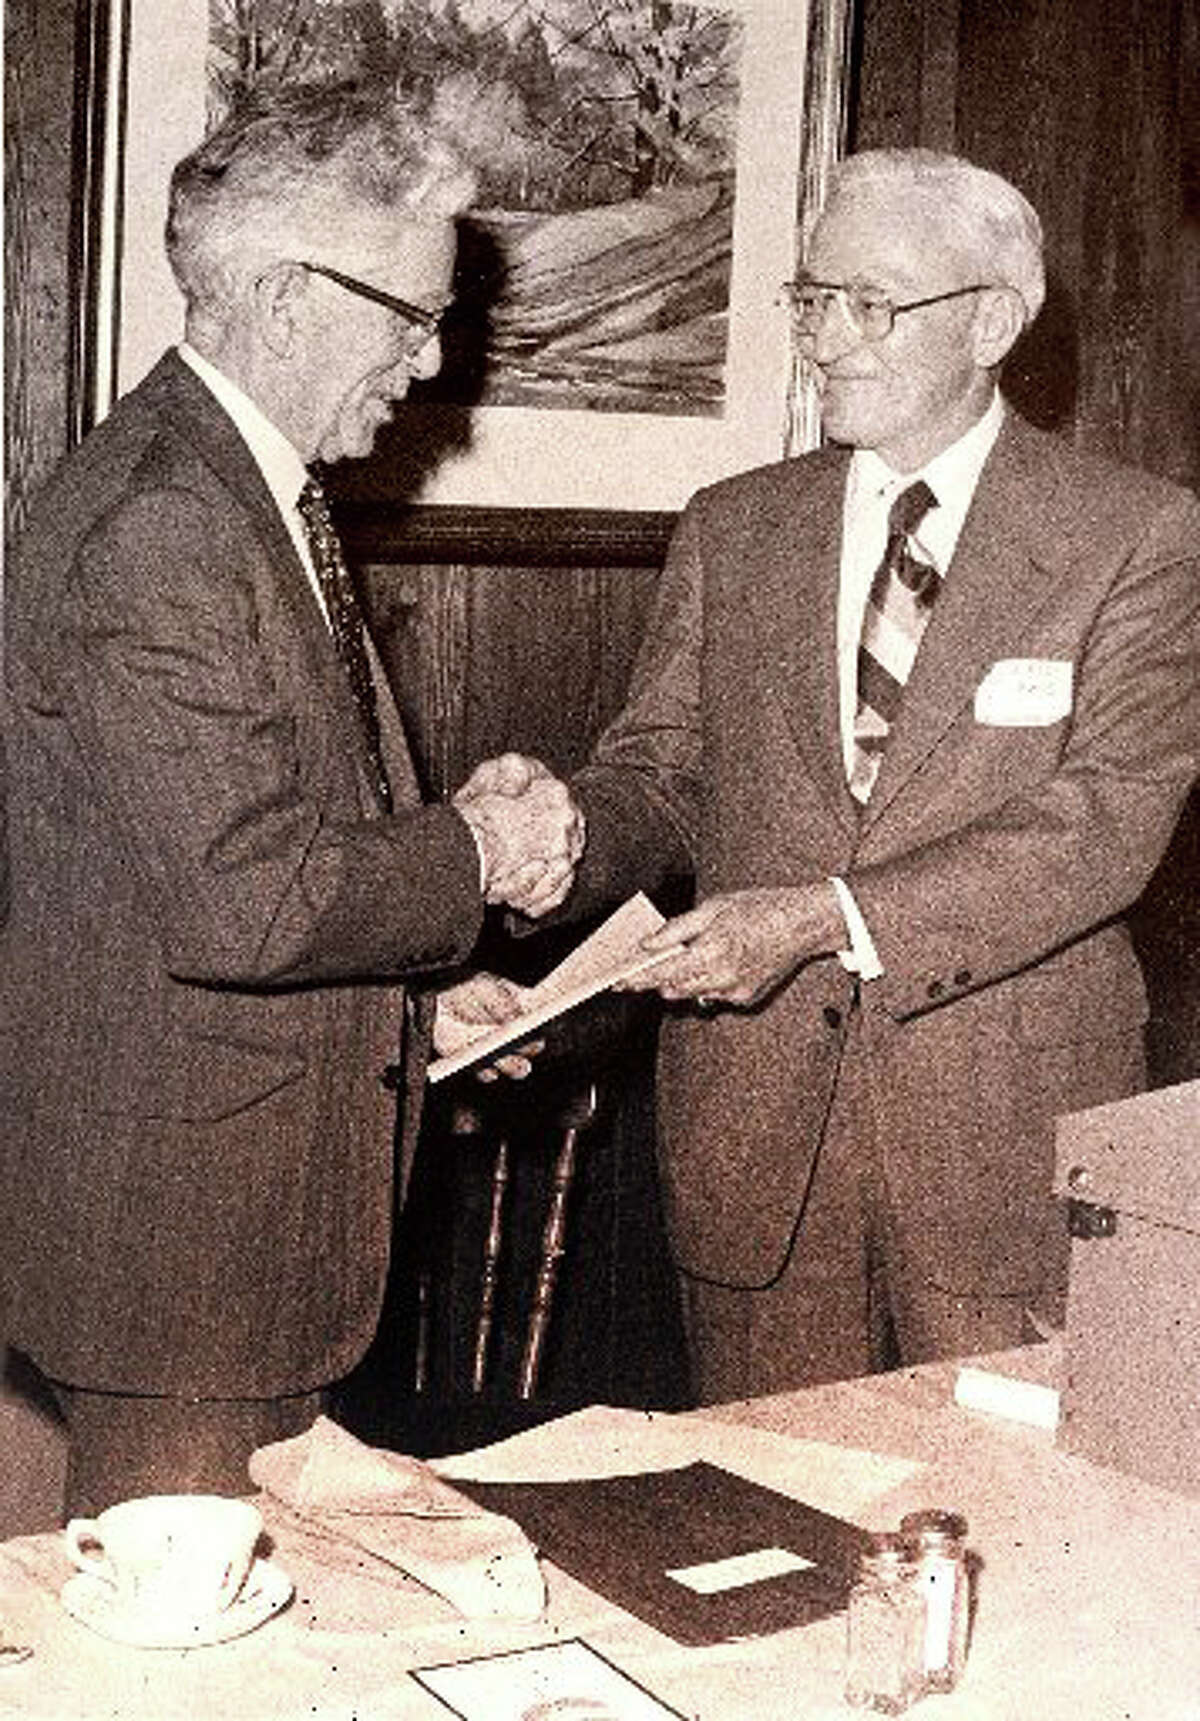 First Selectman John Sullivan receives the deed for open space given to the town by GE, from GE's Robert Lewis. The 1974 acquisition became known as the Cascades at the Lake Mohegan open space.